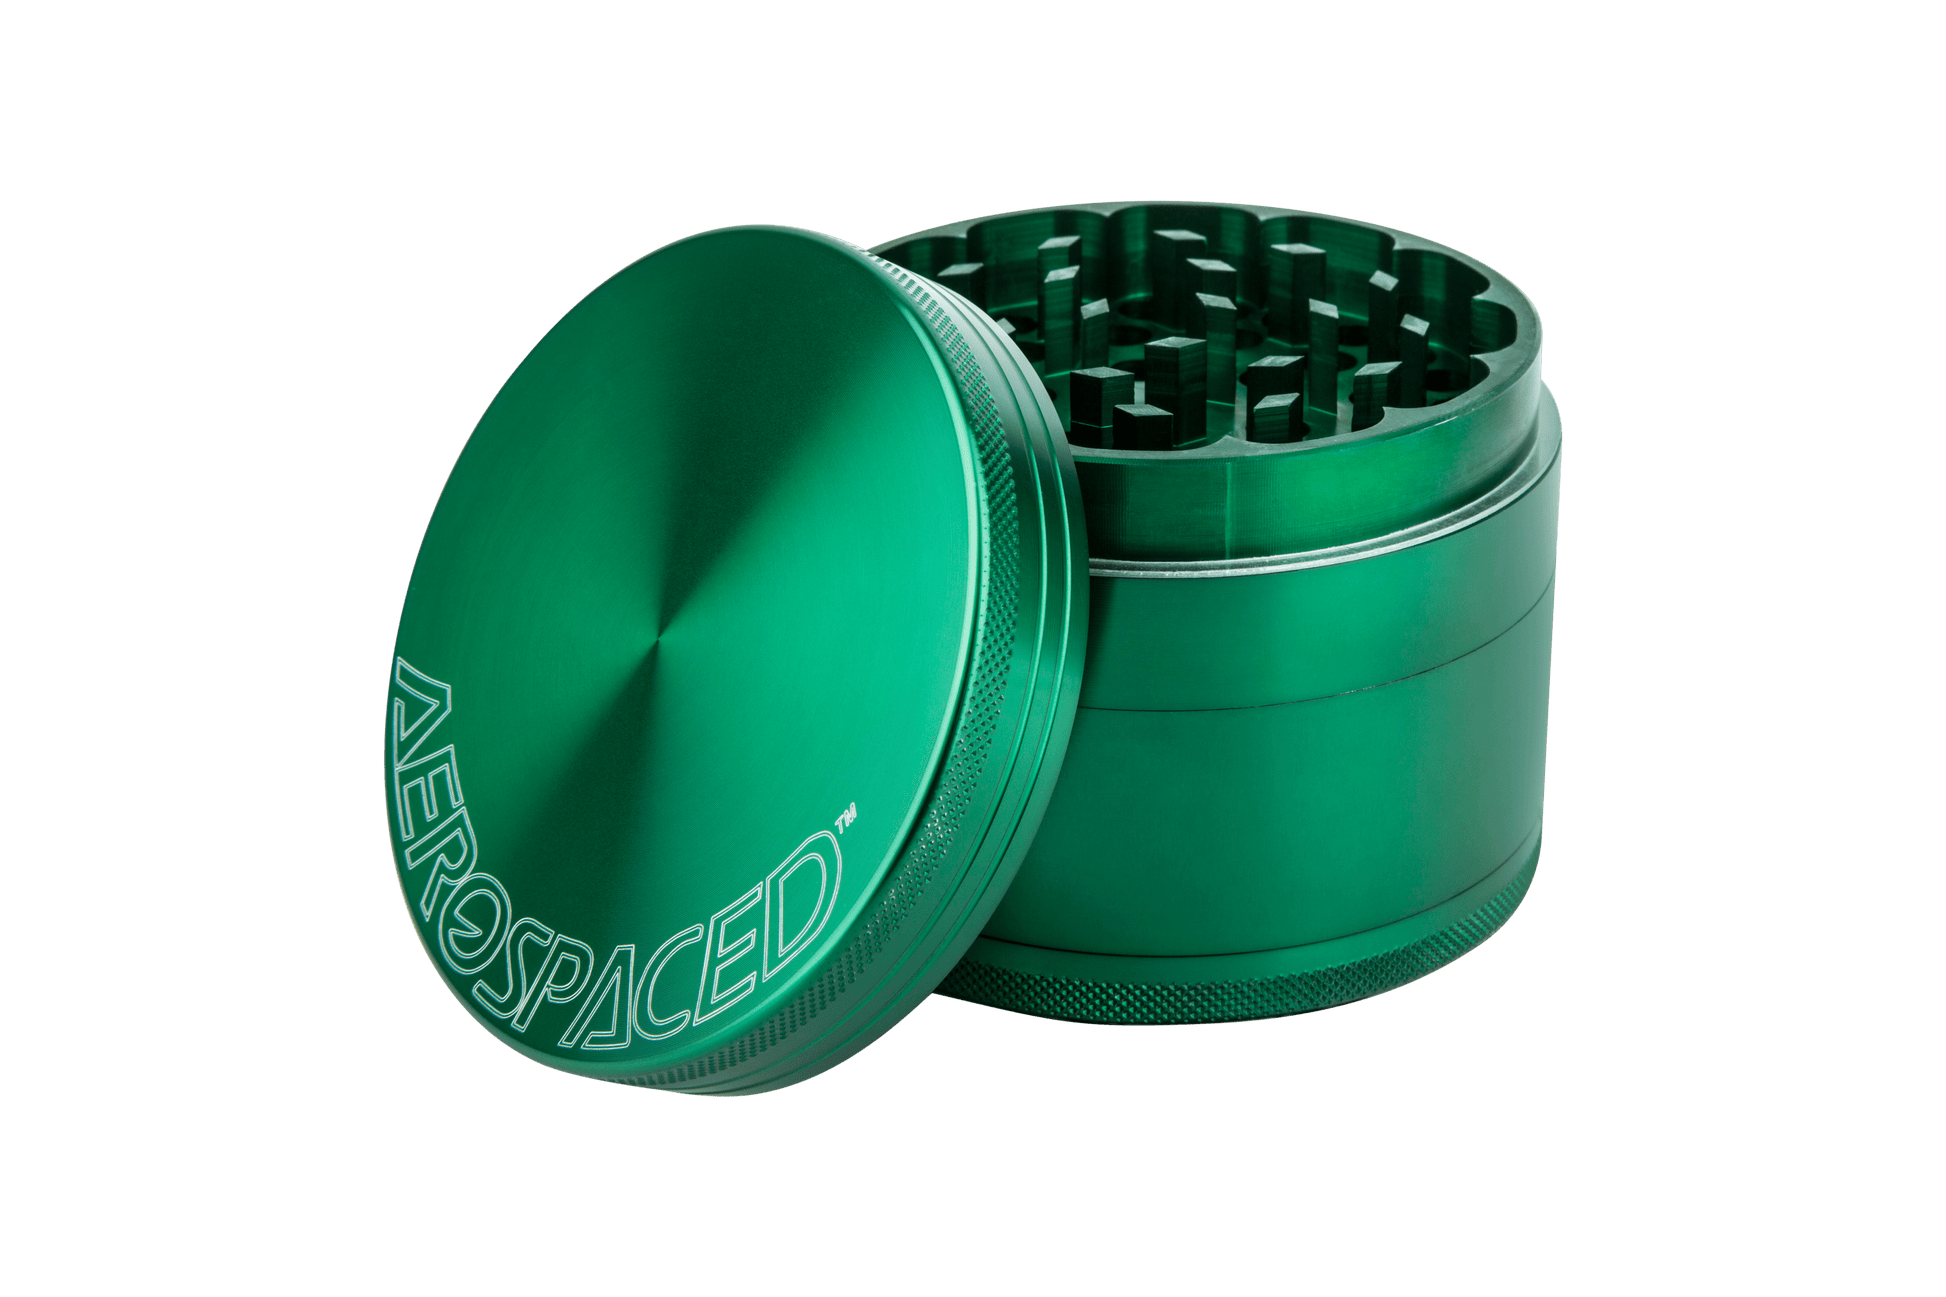 2.5"(63mm) / Green / 4pc Aerospaced by Higher Standards - 4 Piece Grinder - 2.5"